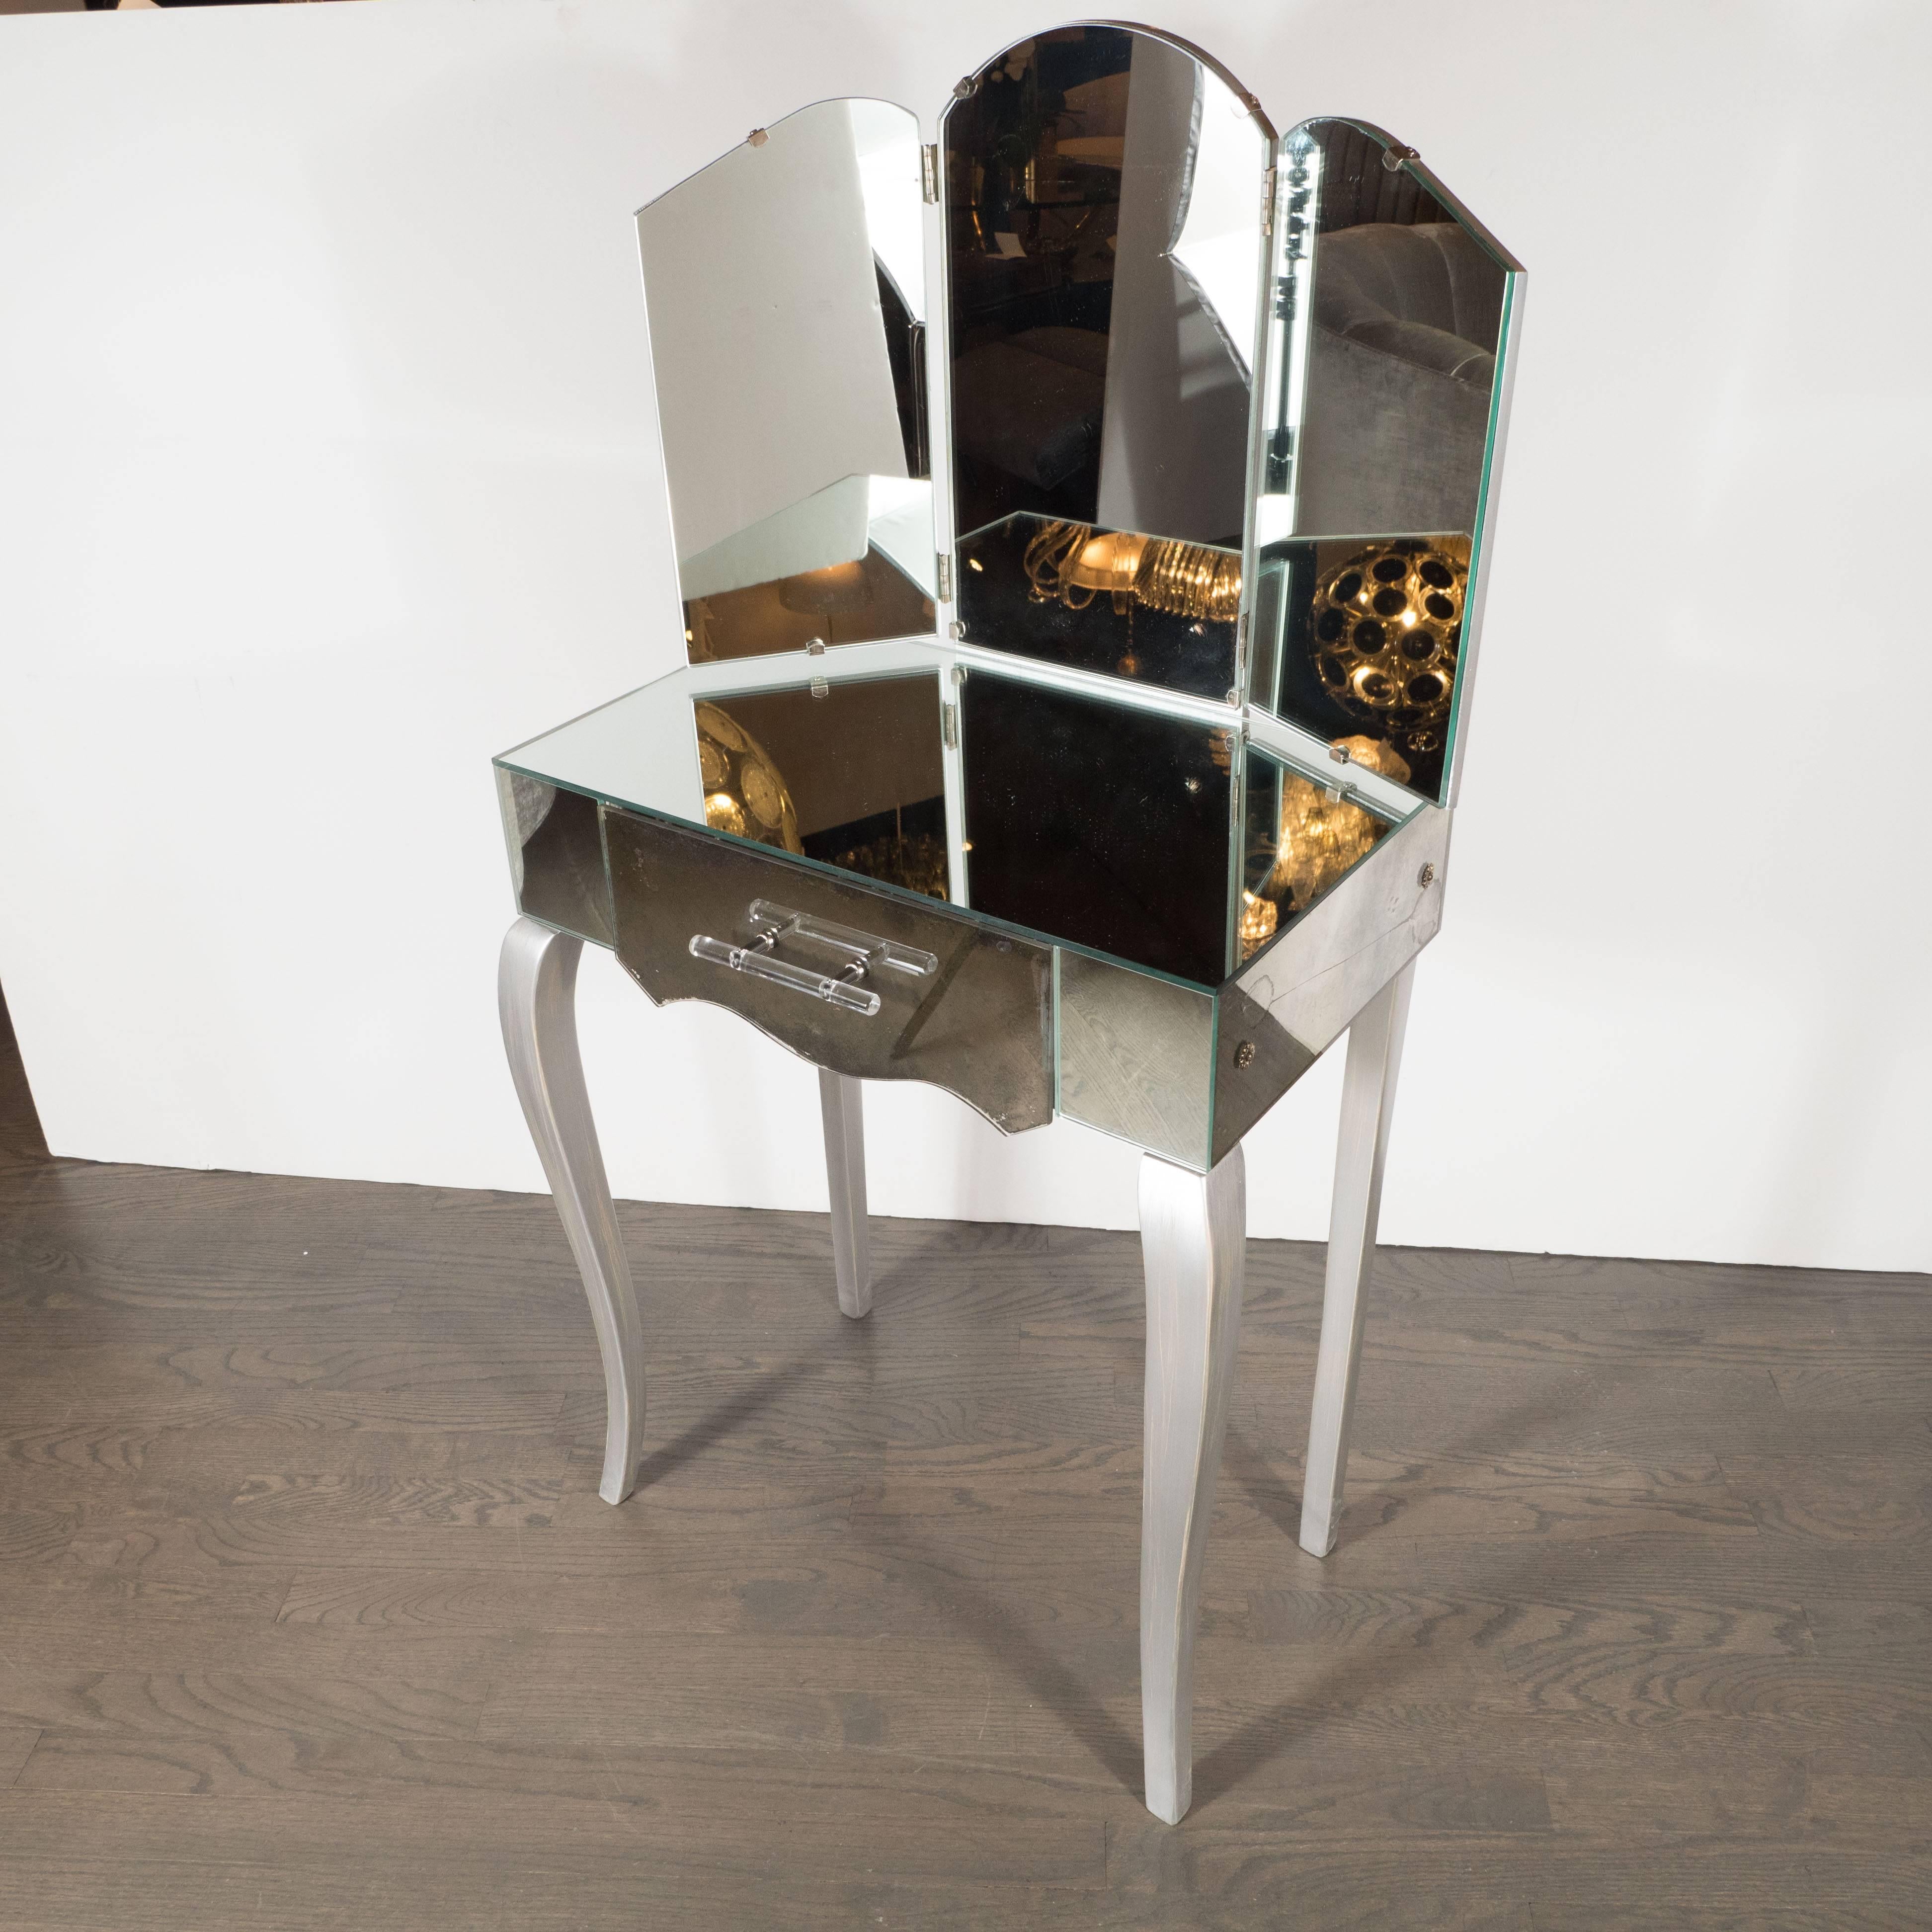 This posh 1940s Hollywood vanity features smoked/antique mirrored glass, floral rivets, and a Lucite and chrome pull. The front legs are cabriolet style, while the hind legs are straight and tapered. The entire back of the piece, the inside of the